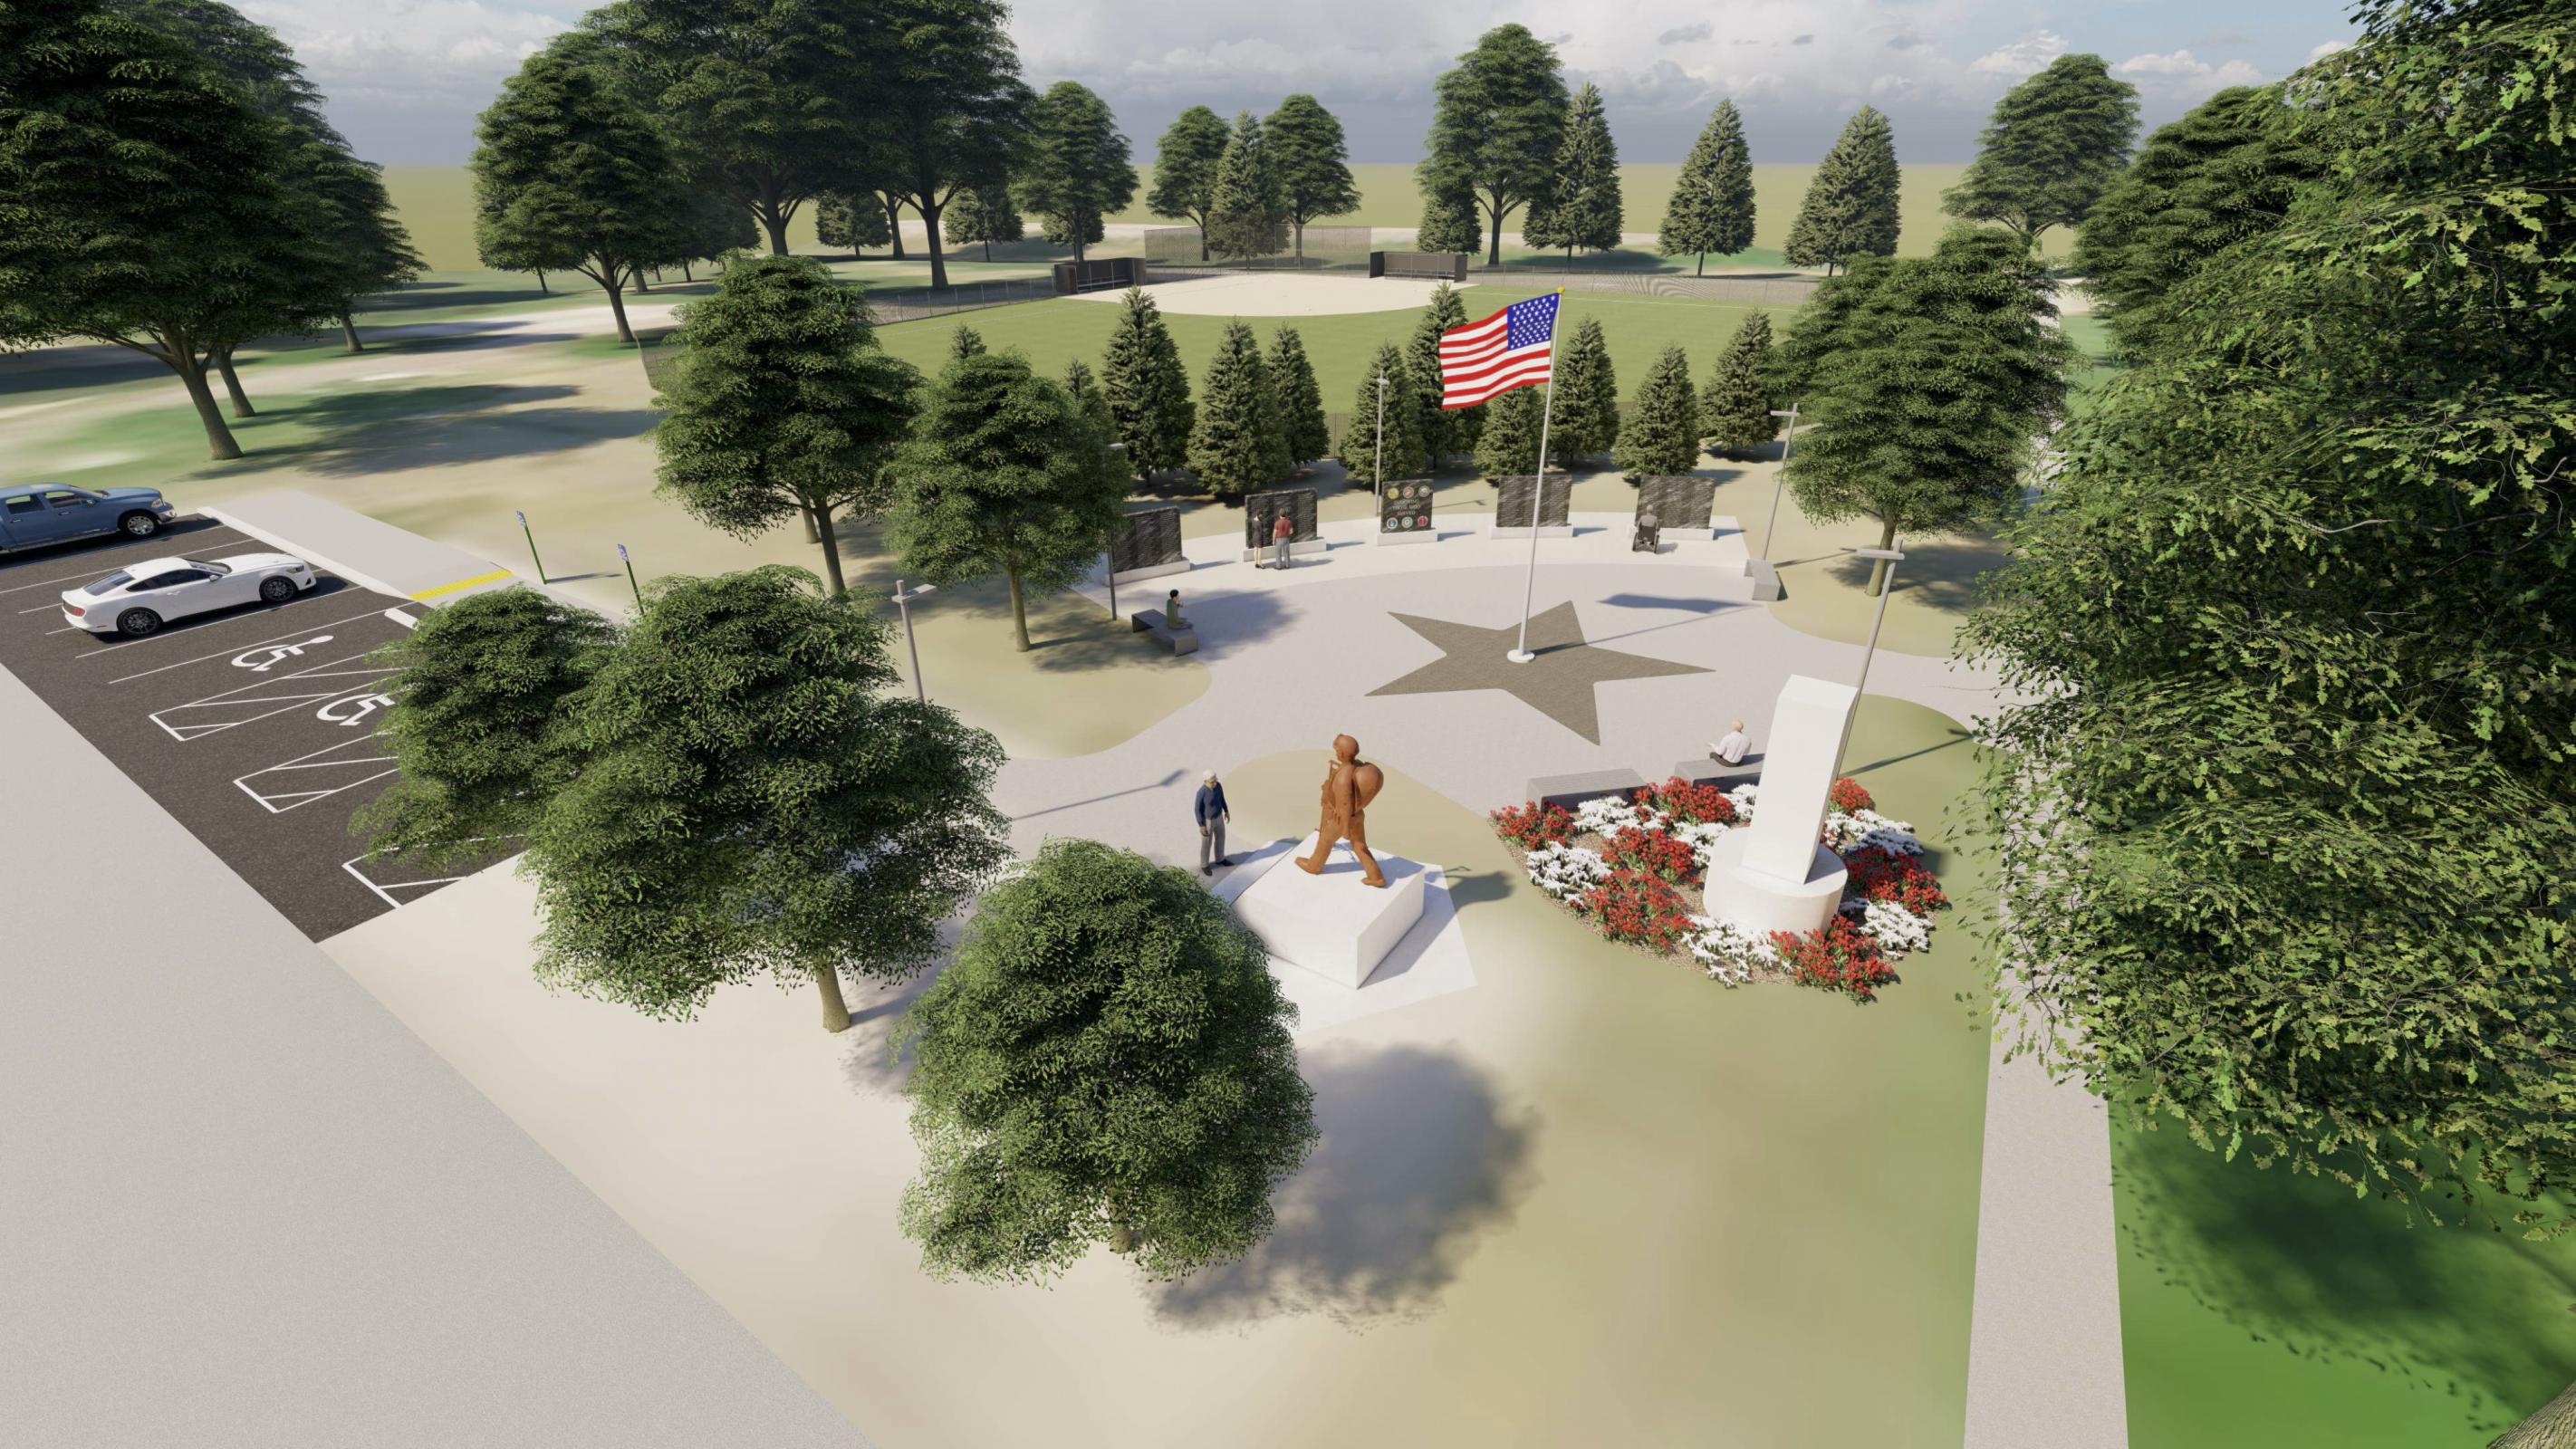 Submit Names by July 17 for New Veterans Memorial Photo